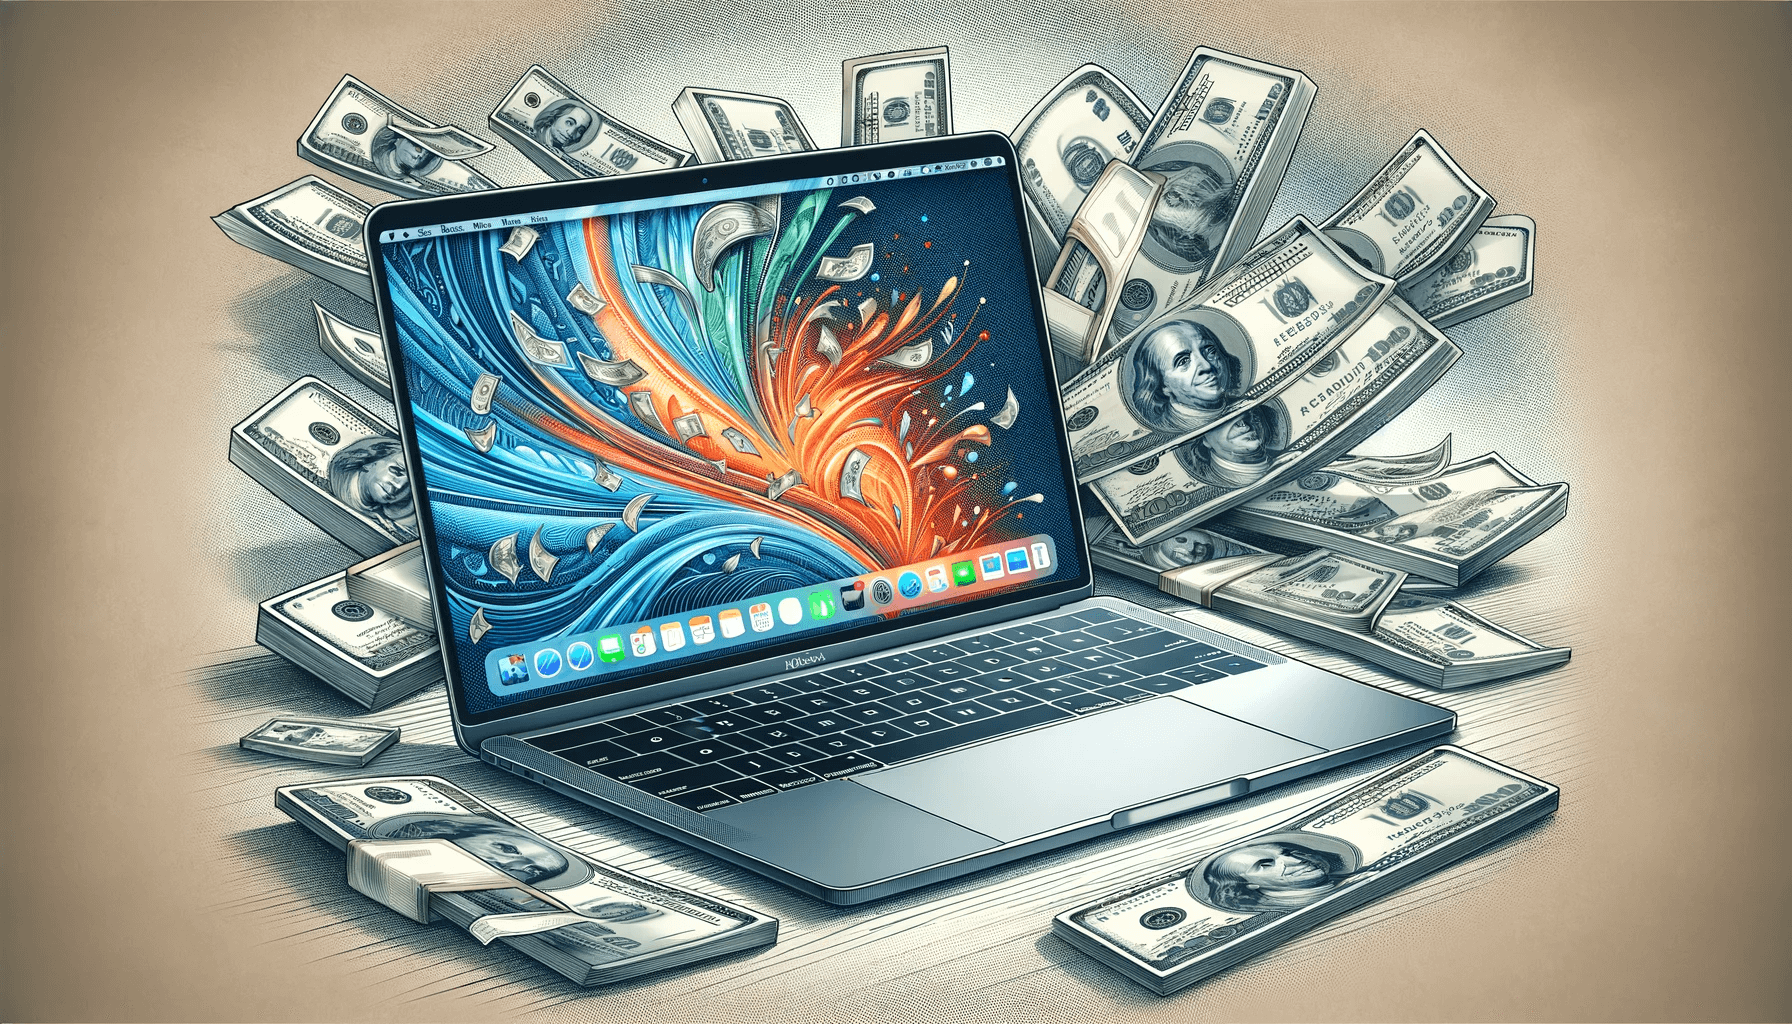 DALL·E 2023 11 22 16.54.20 A digital illustration of a MacBook with money bills in the background. The MacBook is depicted open on a desk showcasing its sleek design and high r